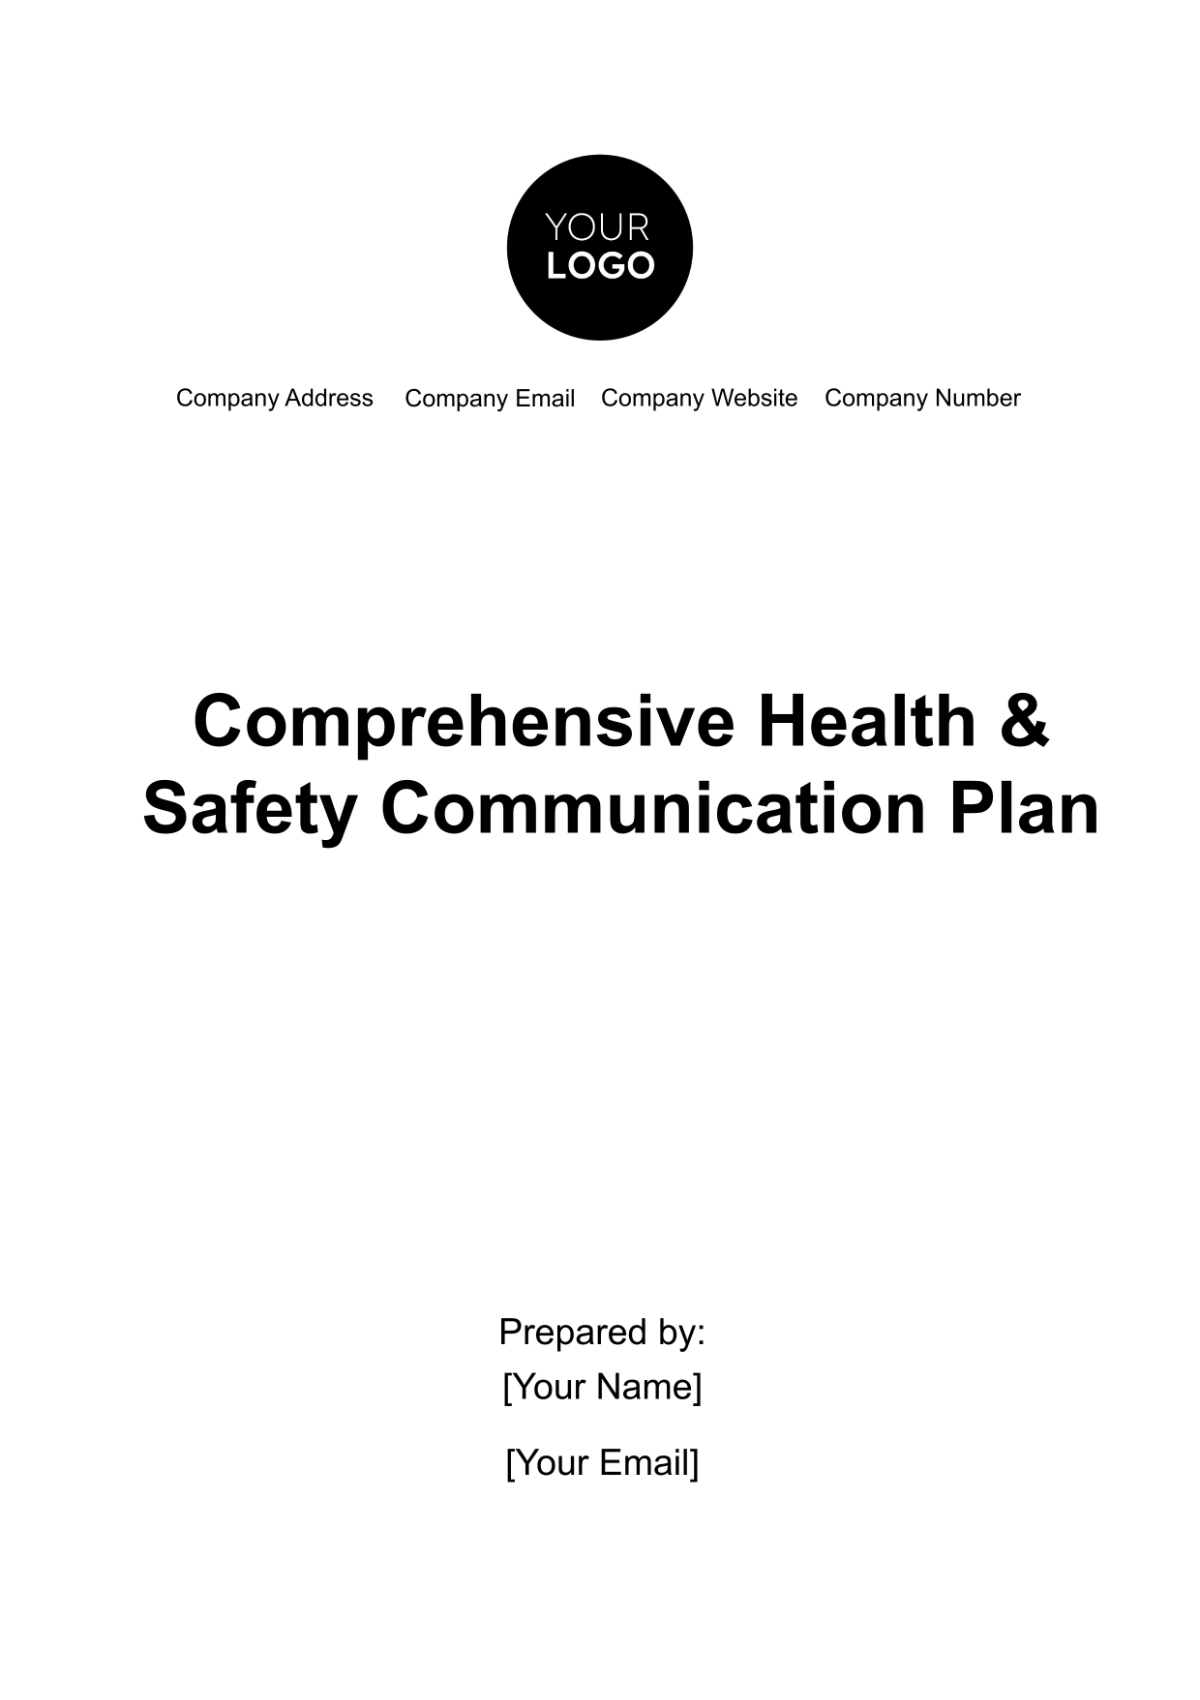 Free Comprehensive Health & Safety Communication Plan Template